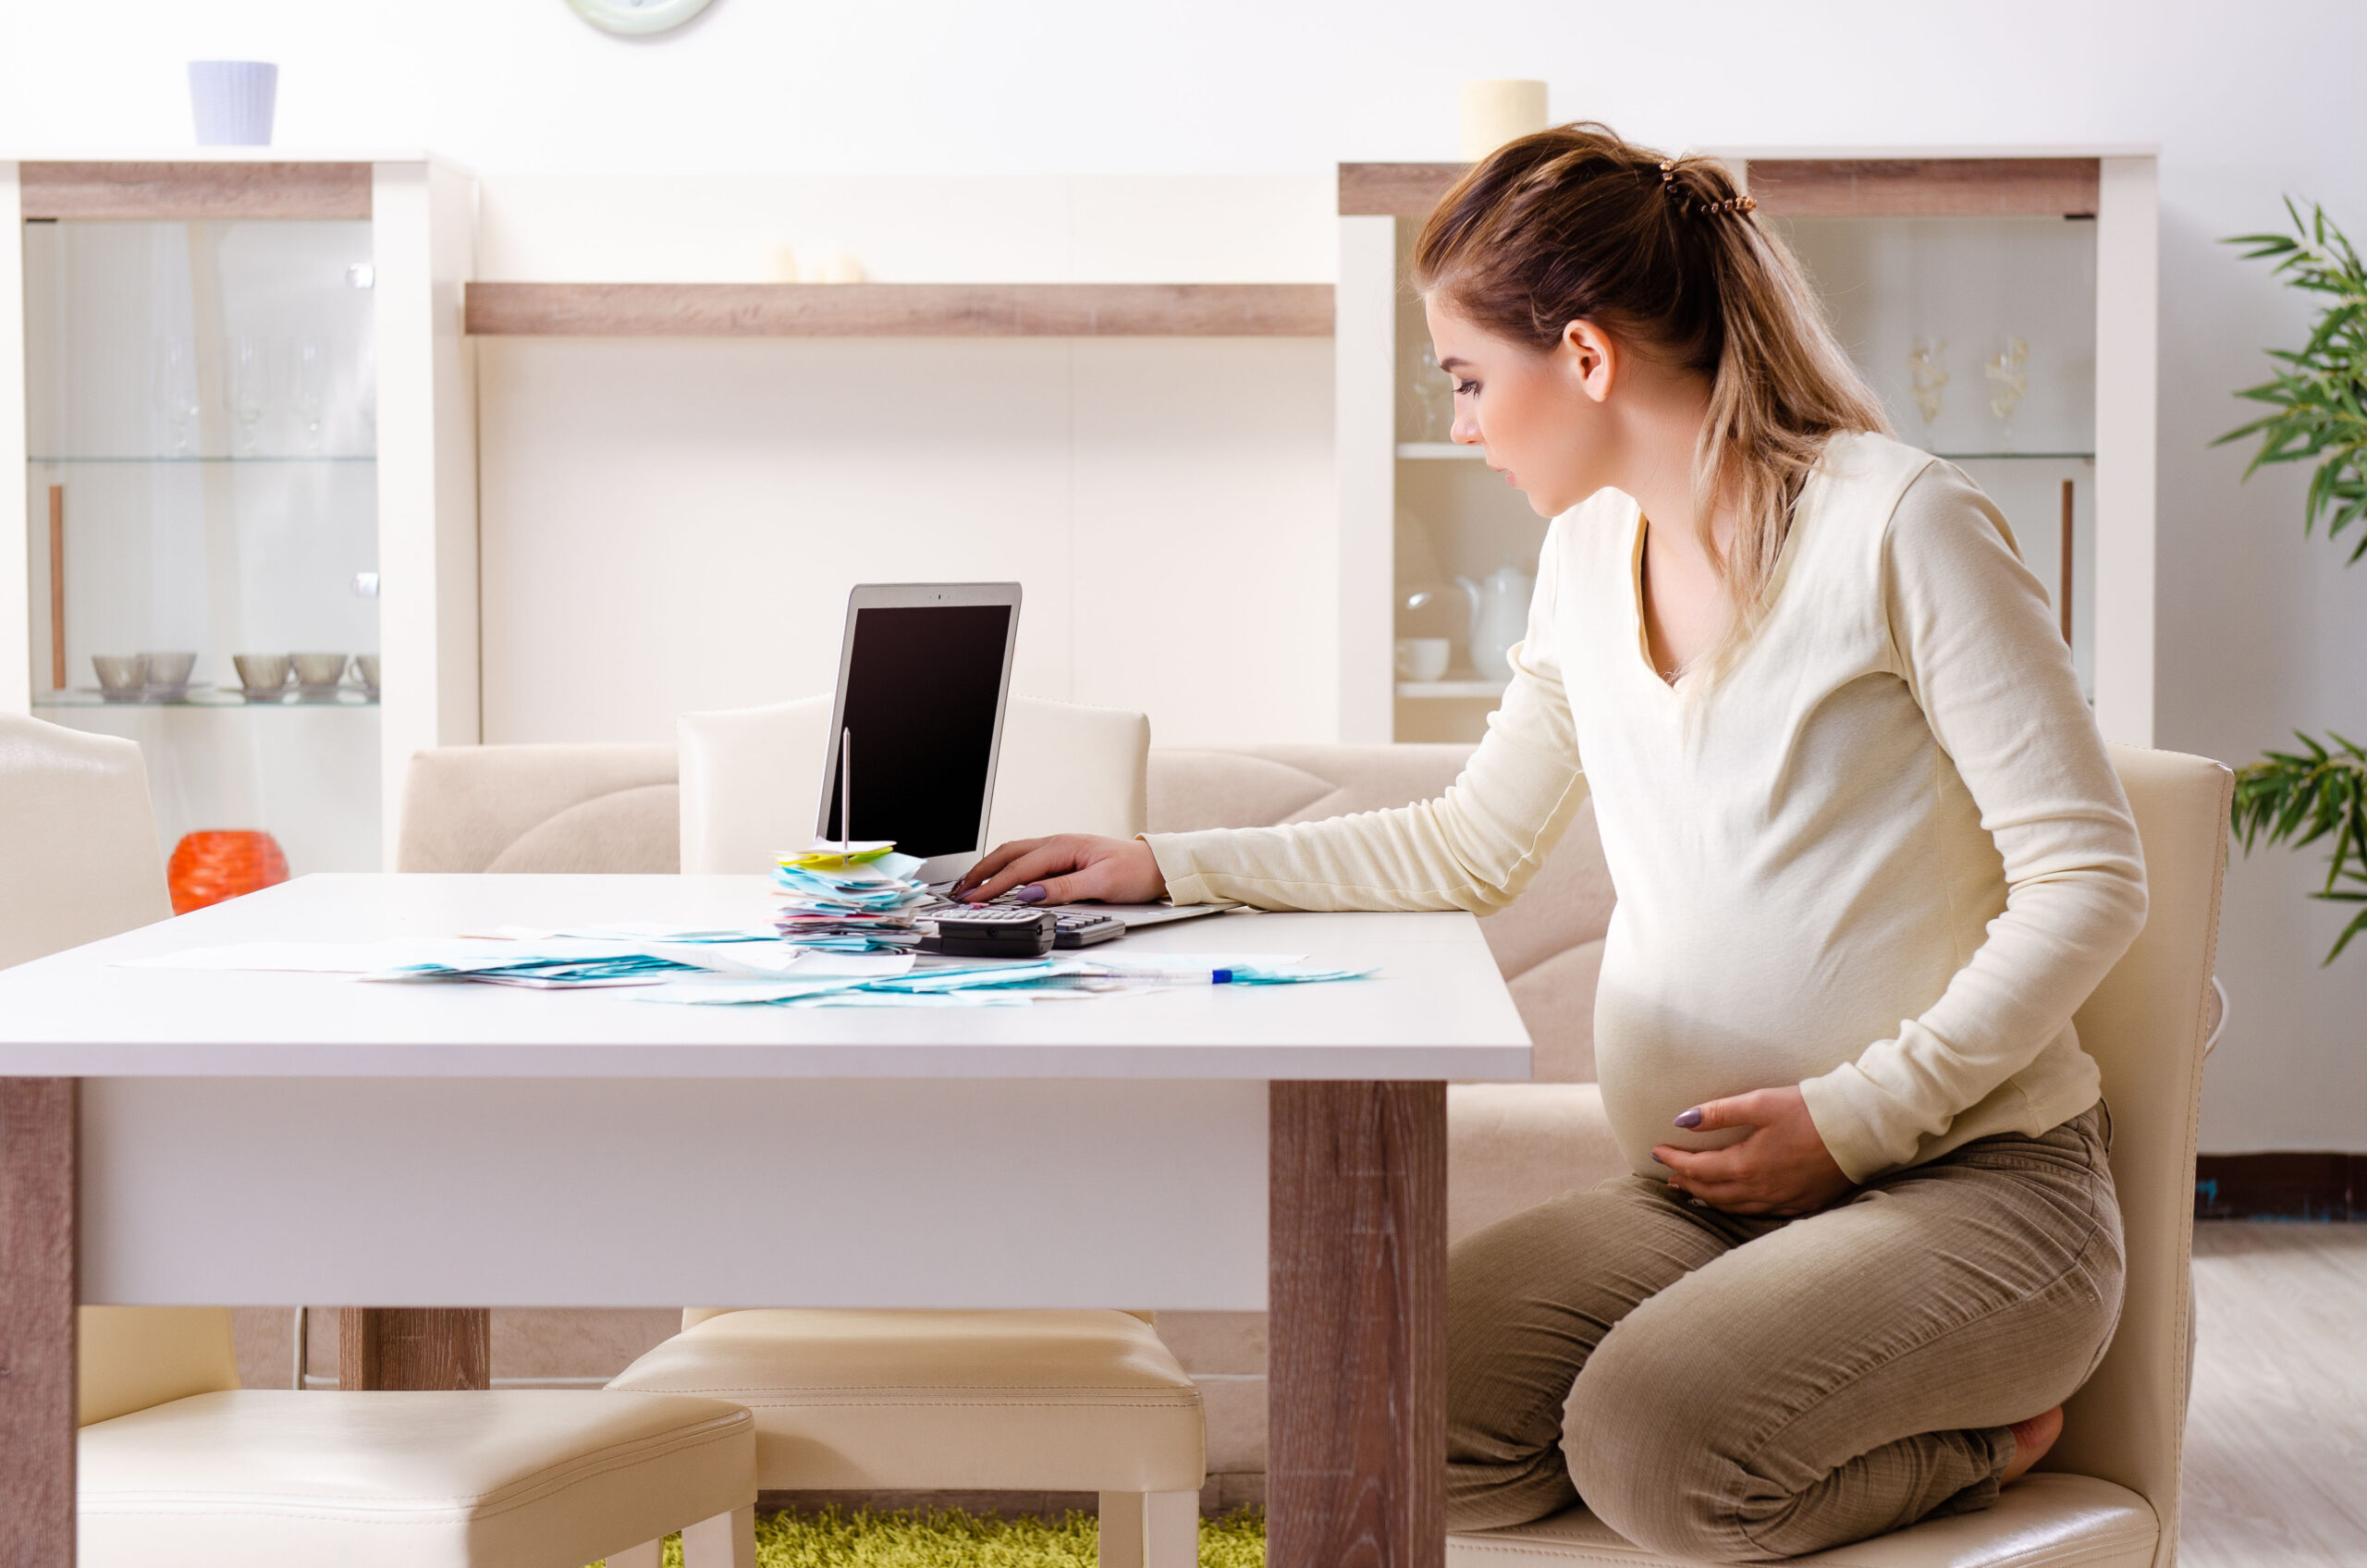 A pregnant woman sits at her desk with her laptop, looking through financial records and receipts.